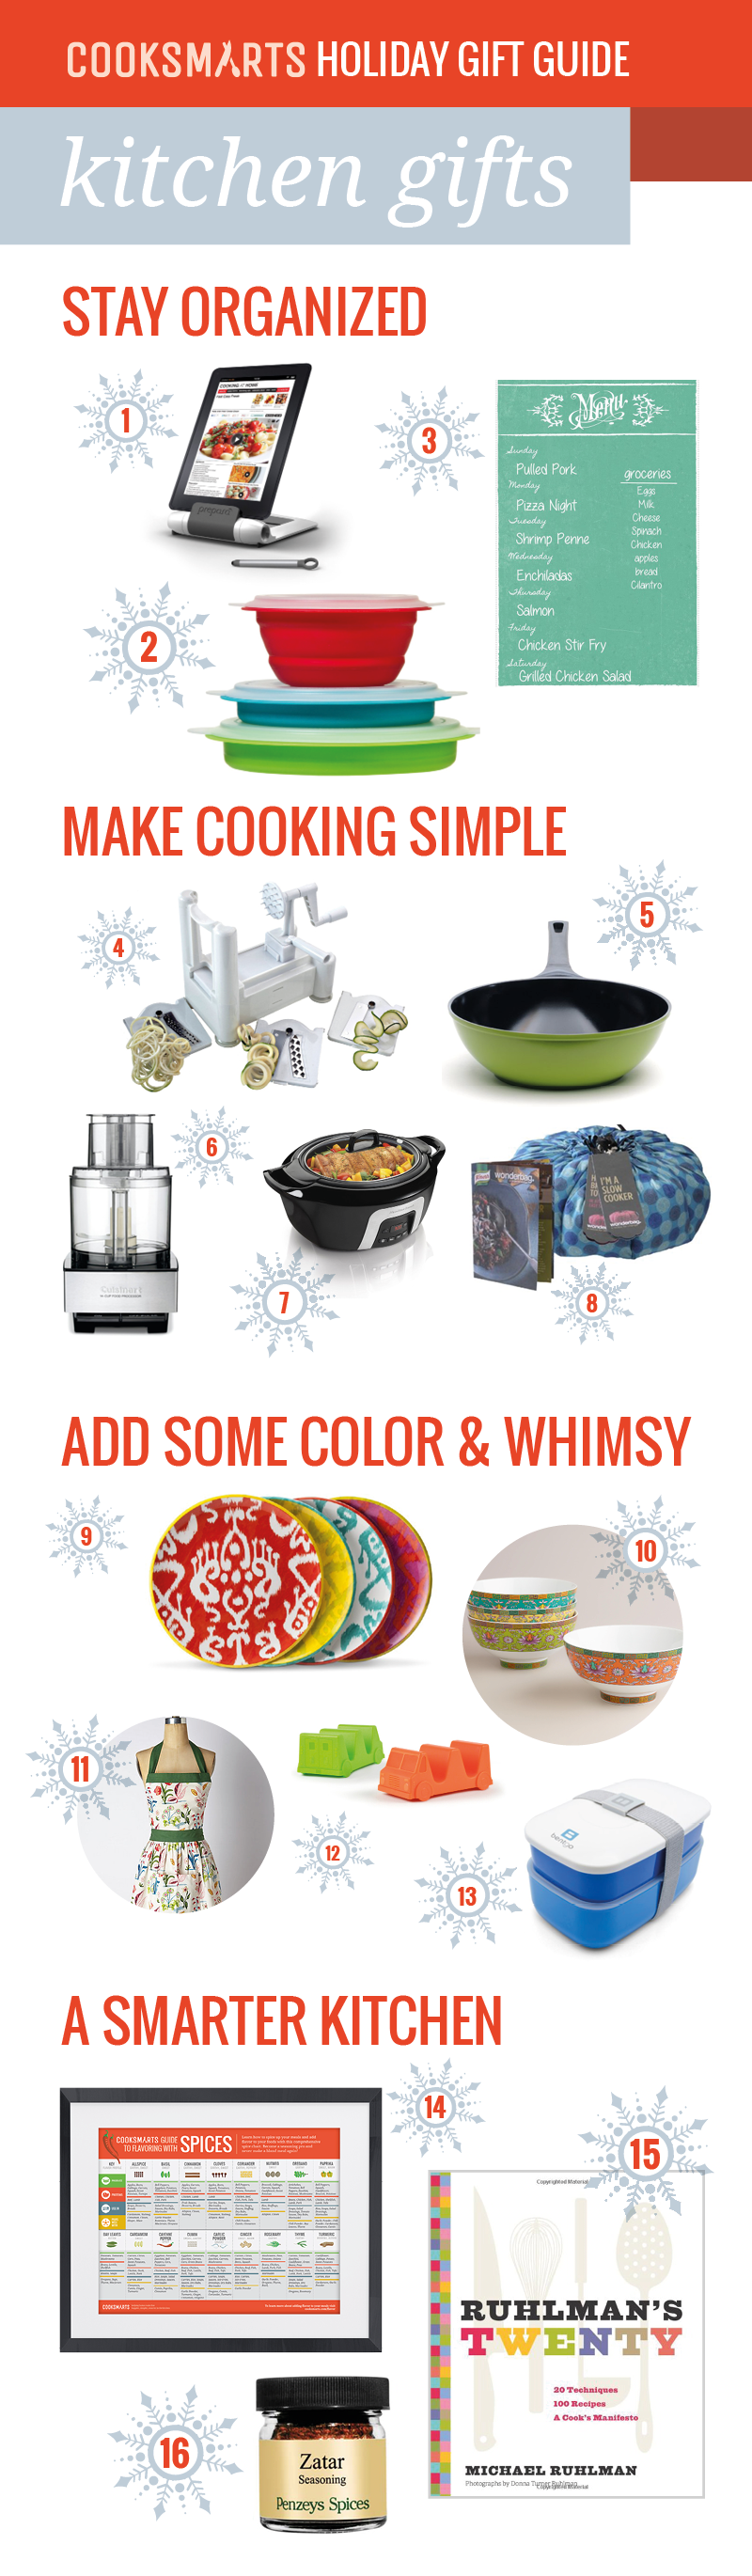 .@cooksmarts Holiday Gift Guide: Kitchen Gifts for Every Home Cook #holidaygiftguide